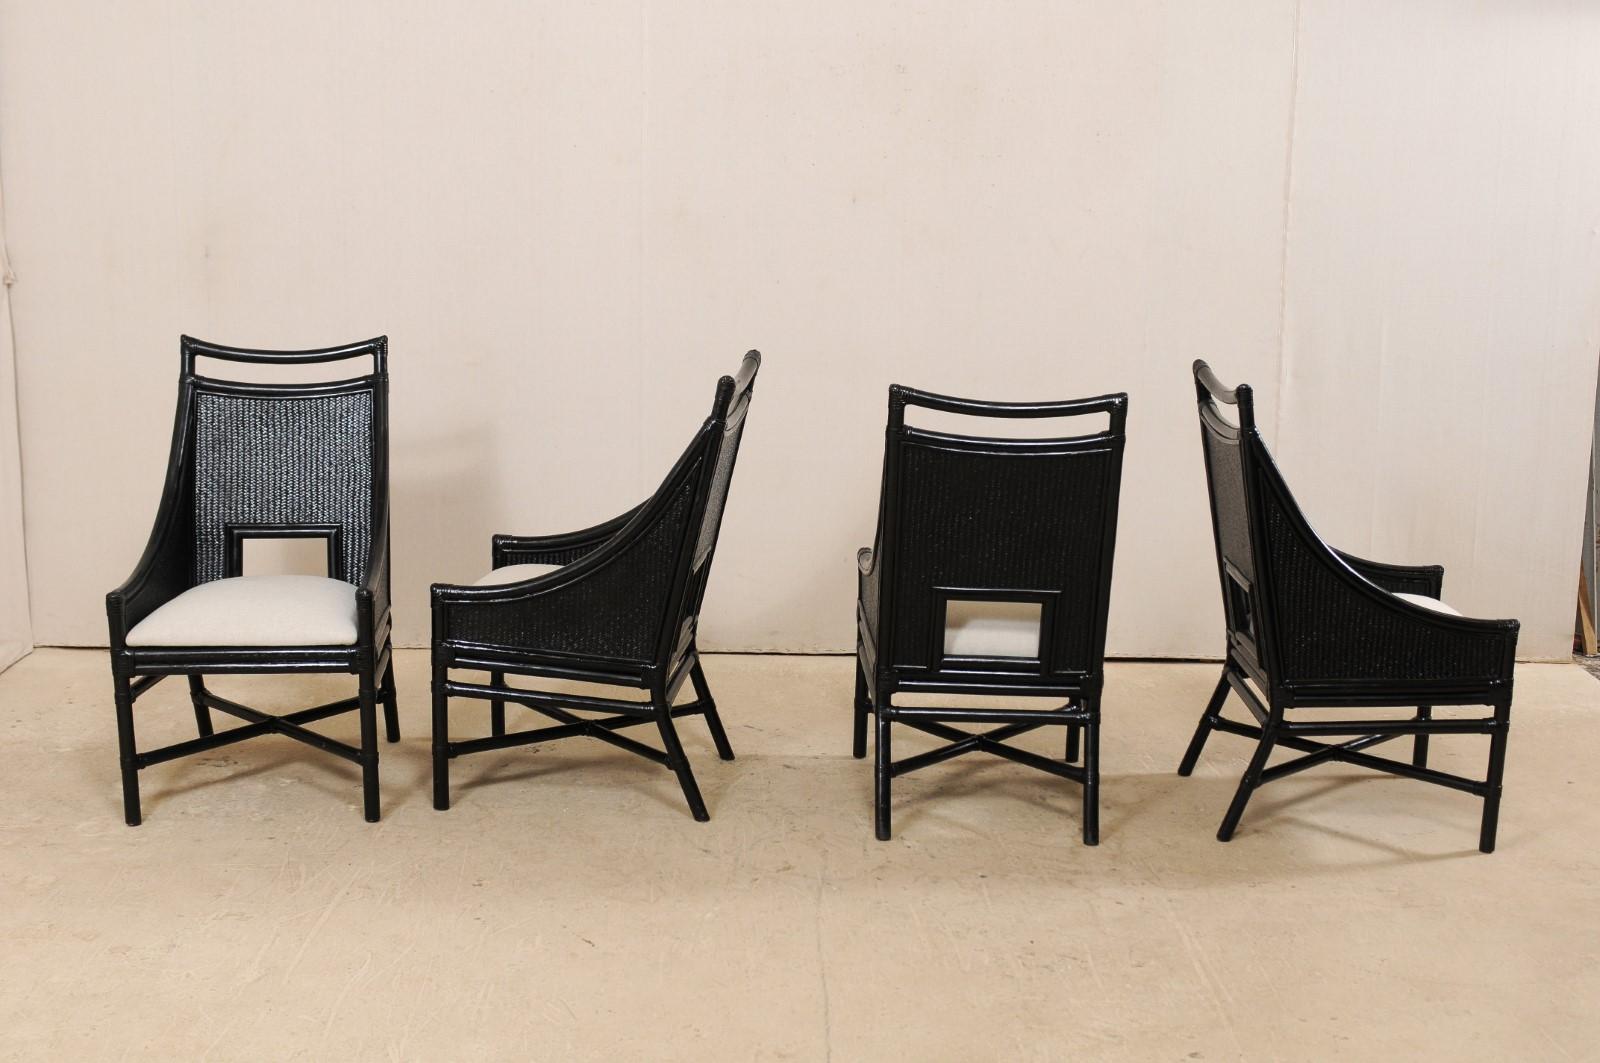 American Set of Eight Vintage Painted Bamboo and Cane Chairs with Newly Upholstered Seats